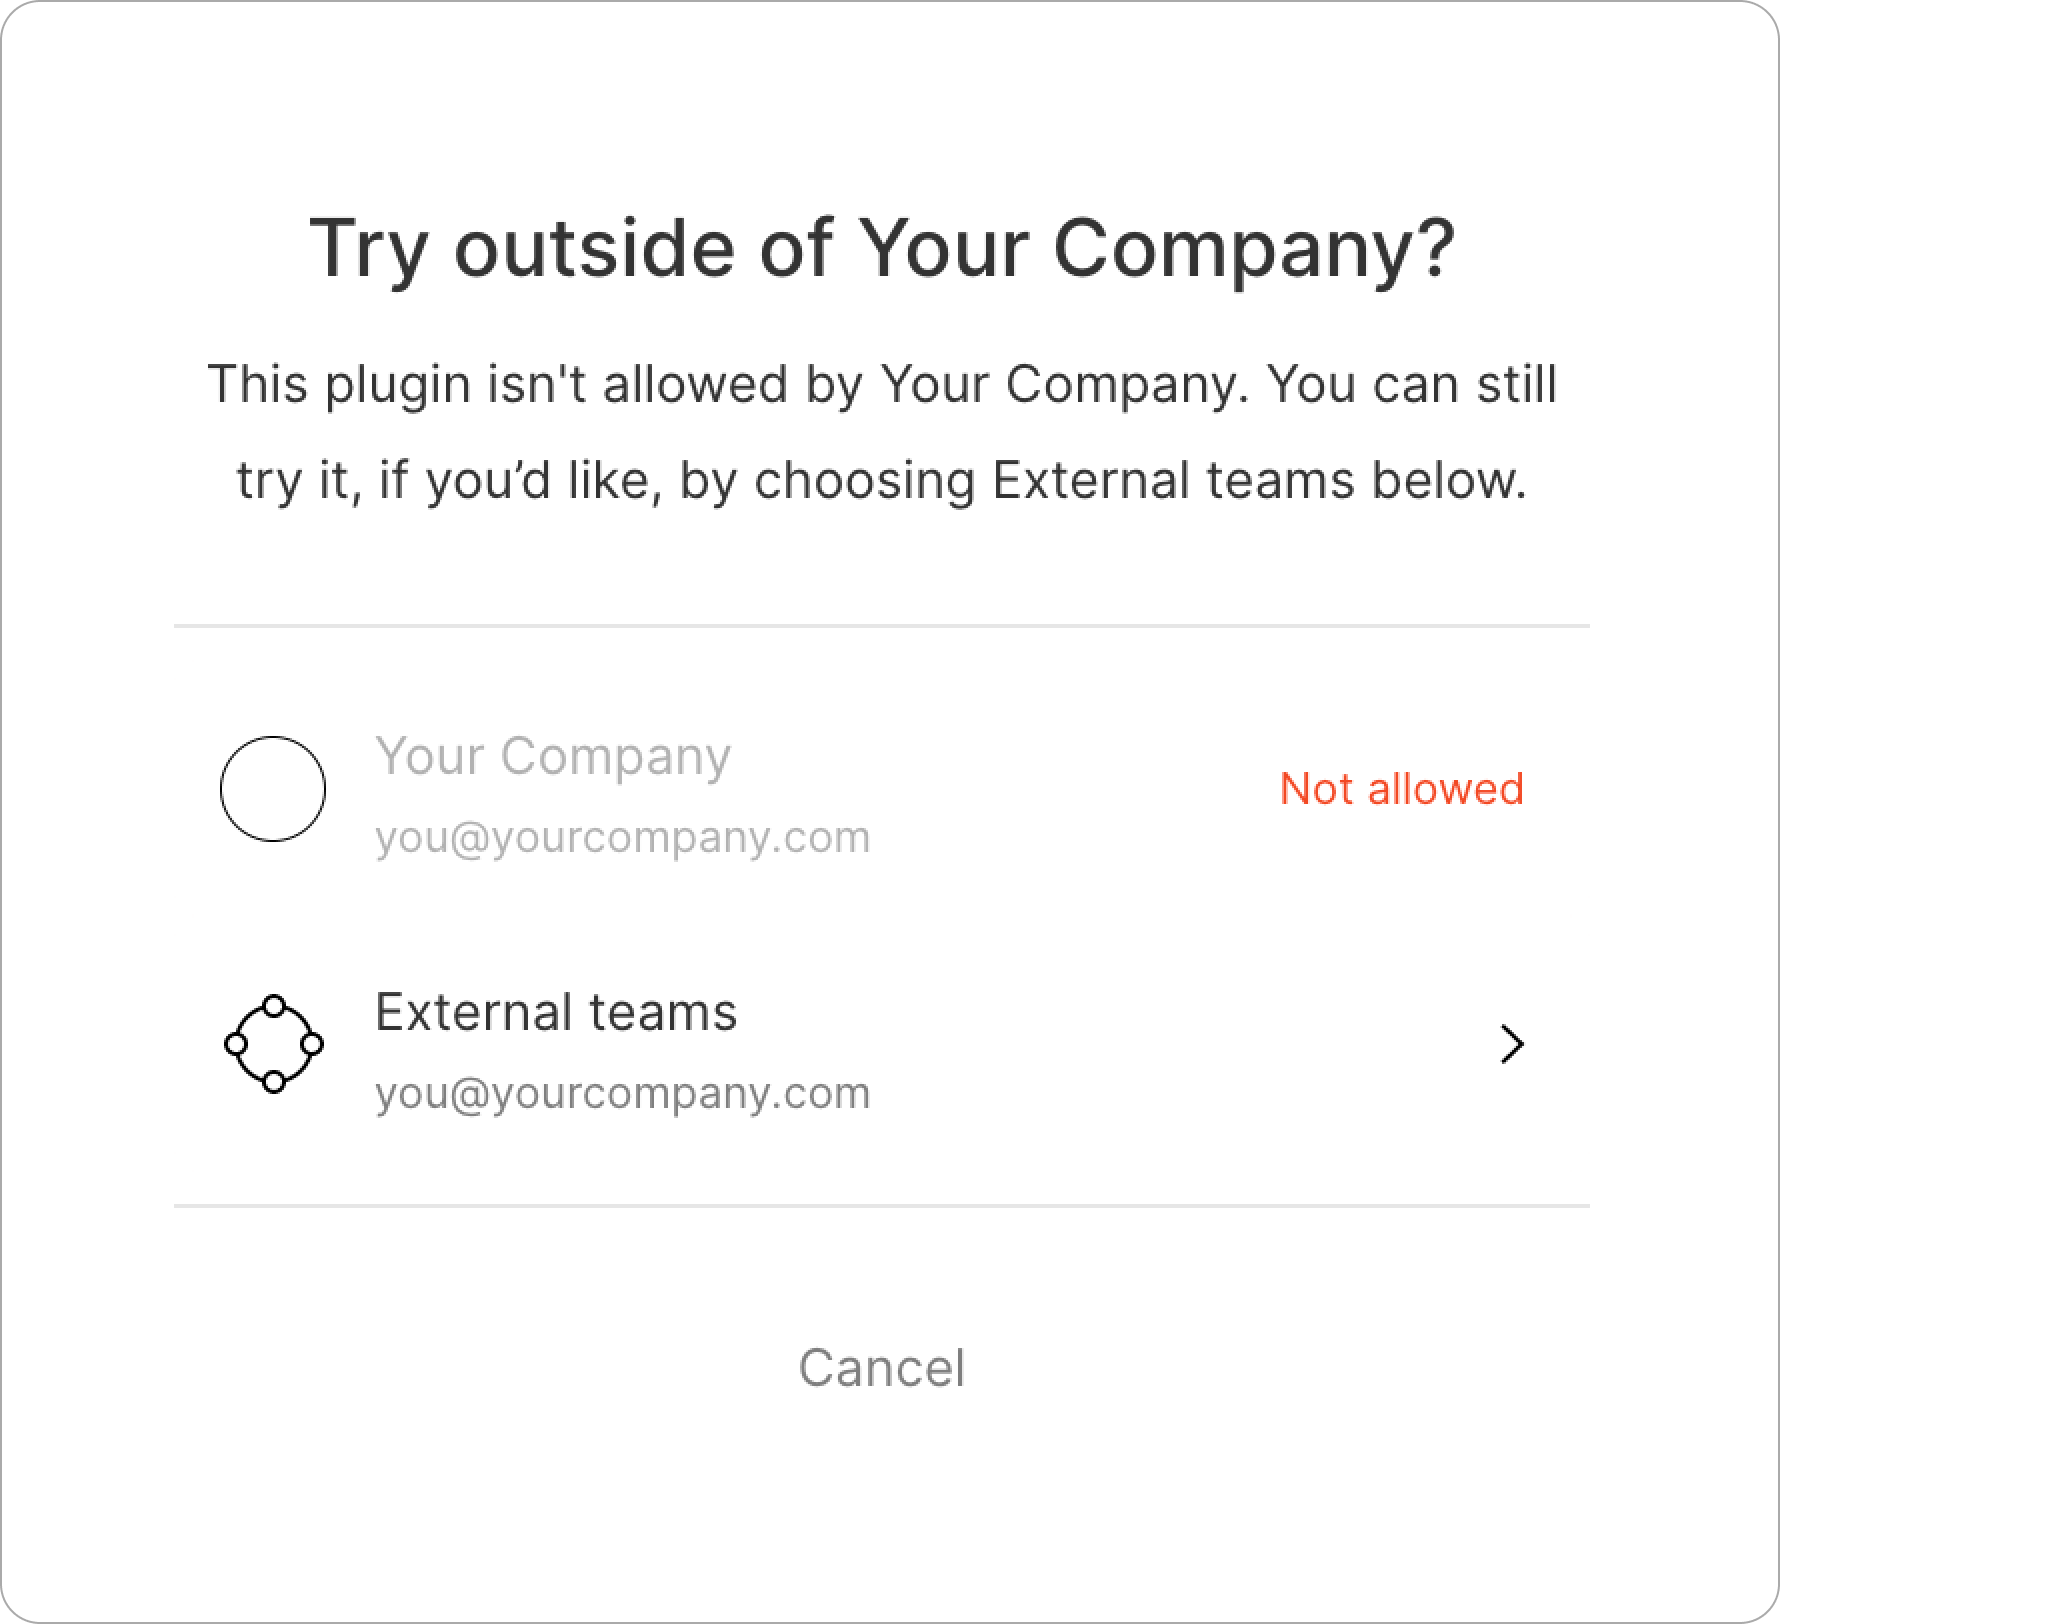 External teams option in the dialog